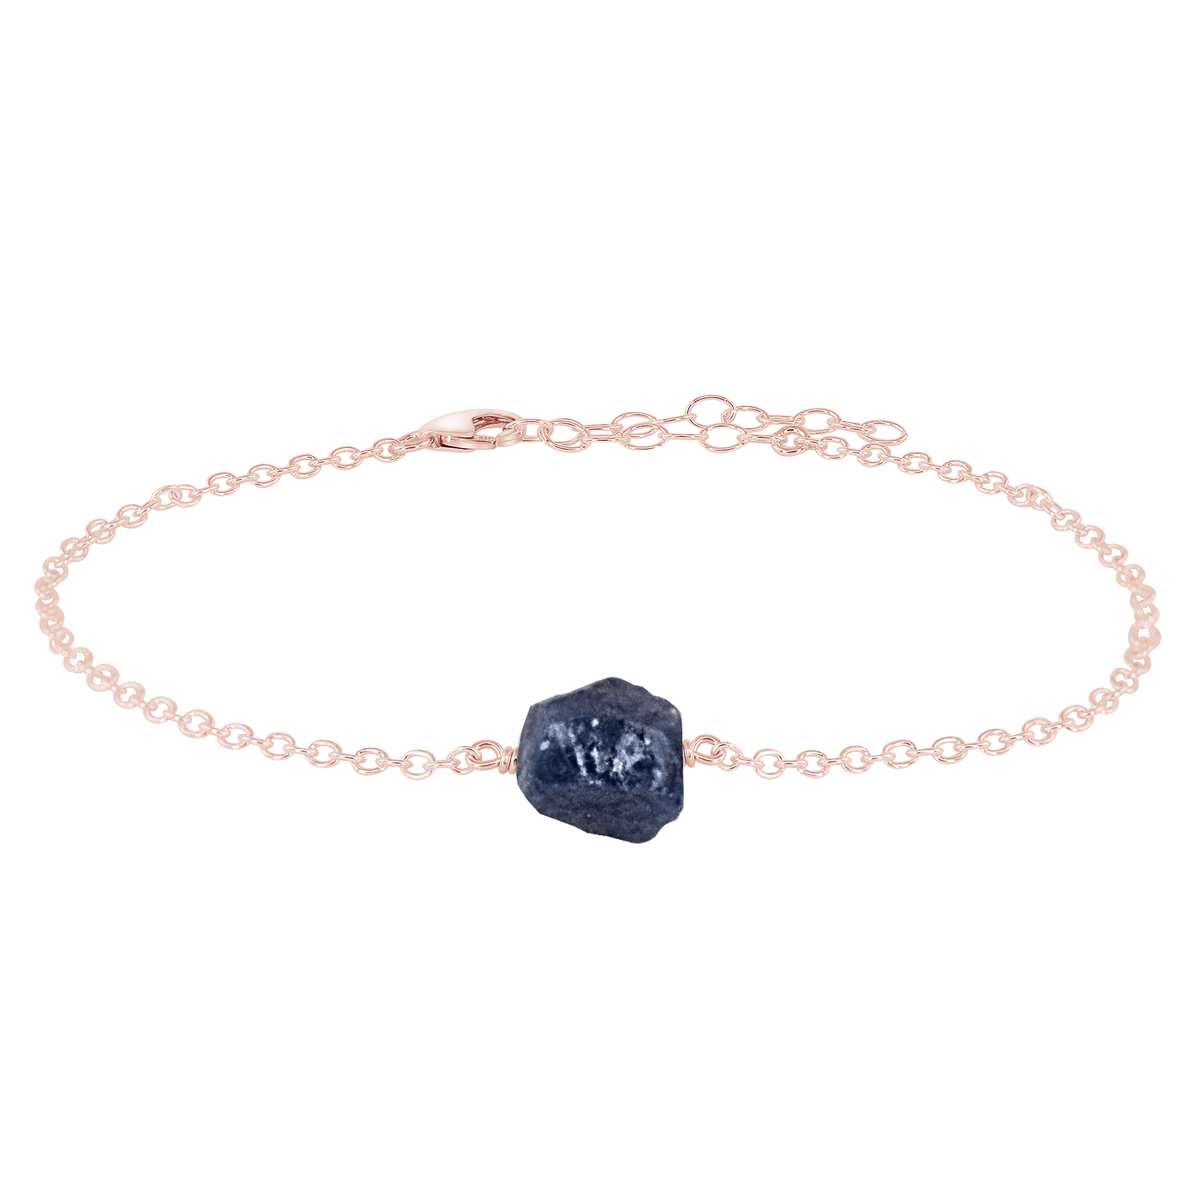 Raw Sapphire Crystal Nugget Anklet - Raw Sapphire Crystal Nugget Anklet - 14k Rose Gold Fill - Luna Tide Handmade Crystal Jewellery